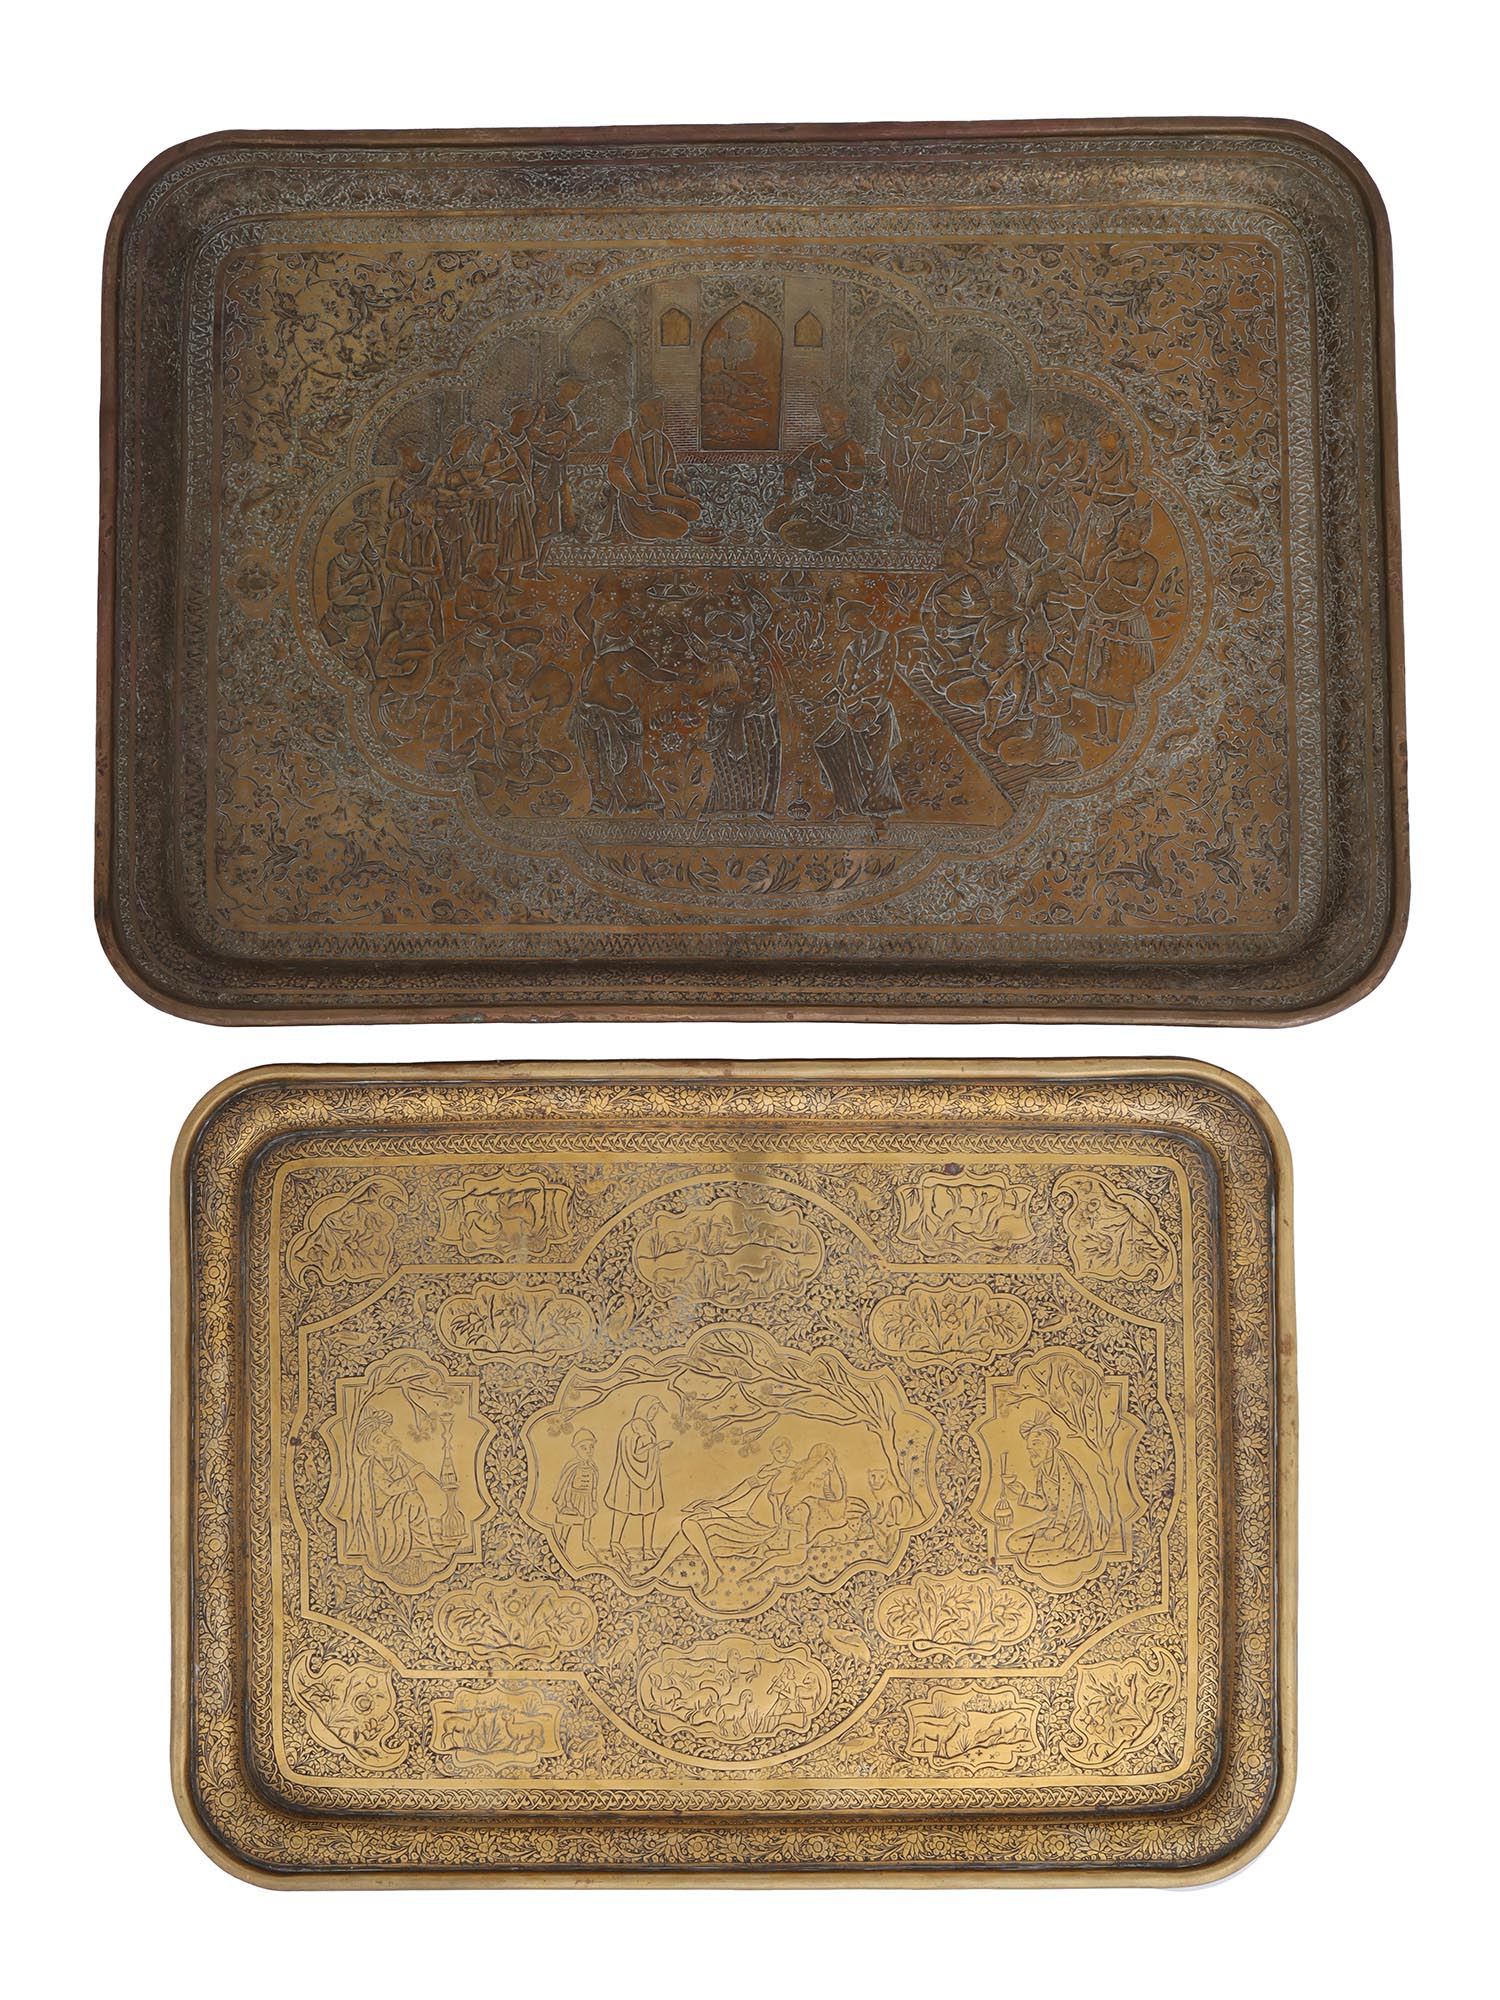 TWO ANTIQUE PERSIAN ENGRAVED BRASS SERVING TRAYS PIC-1